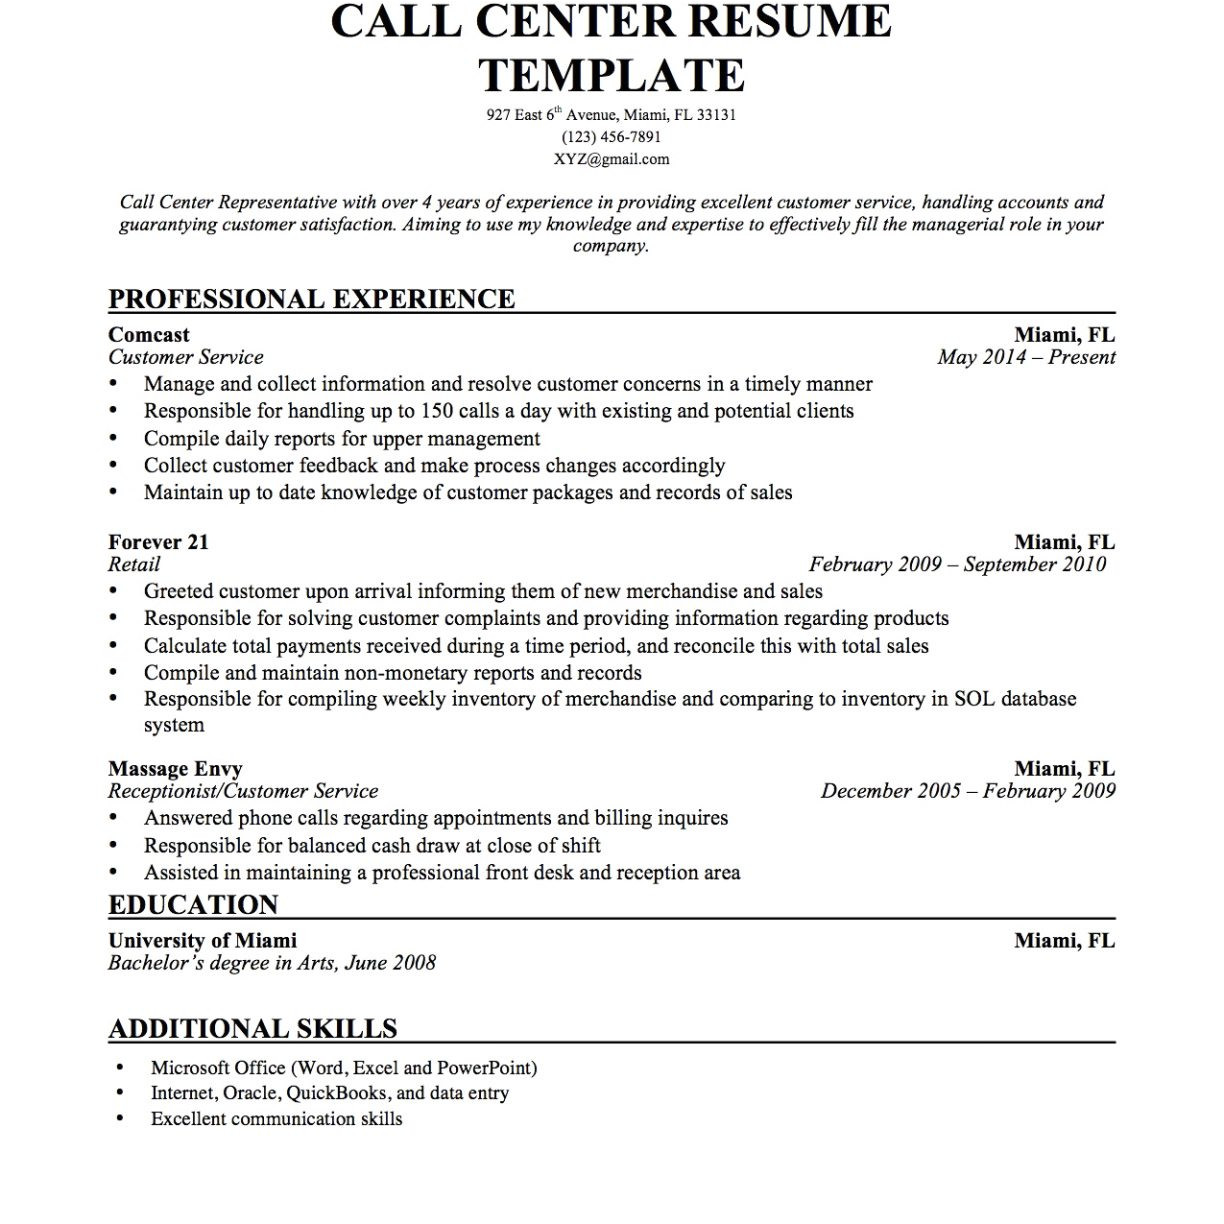 resume for call center agent without experience philippines